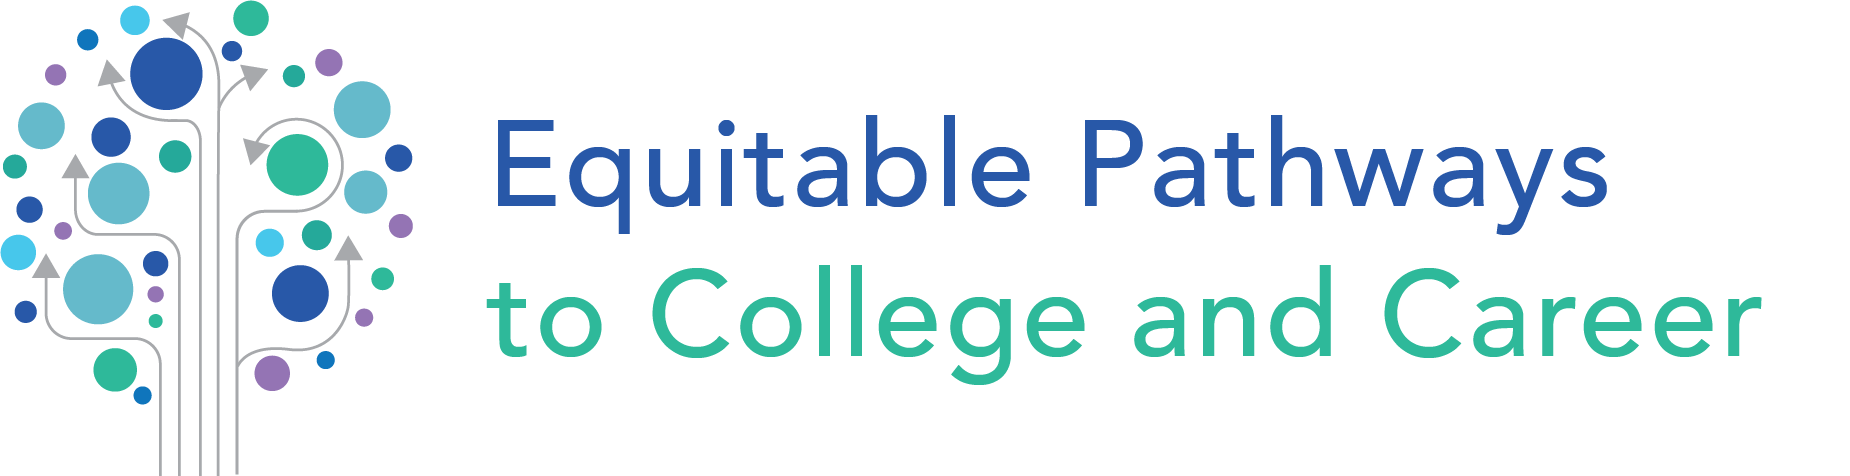 Equitable Pathways to College and Career logo